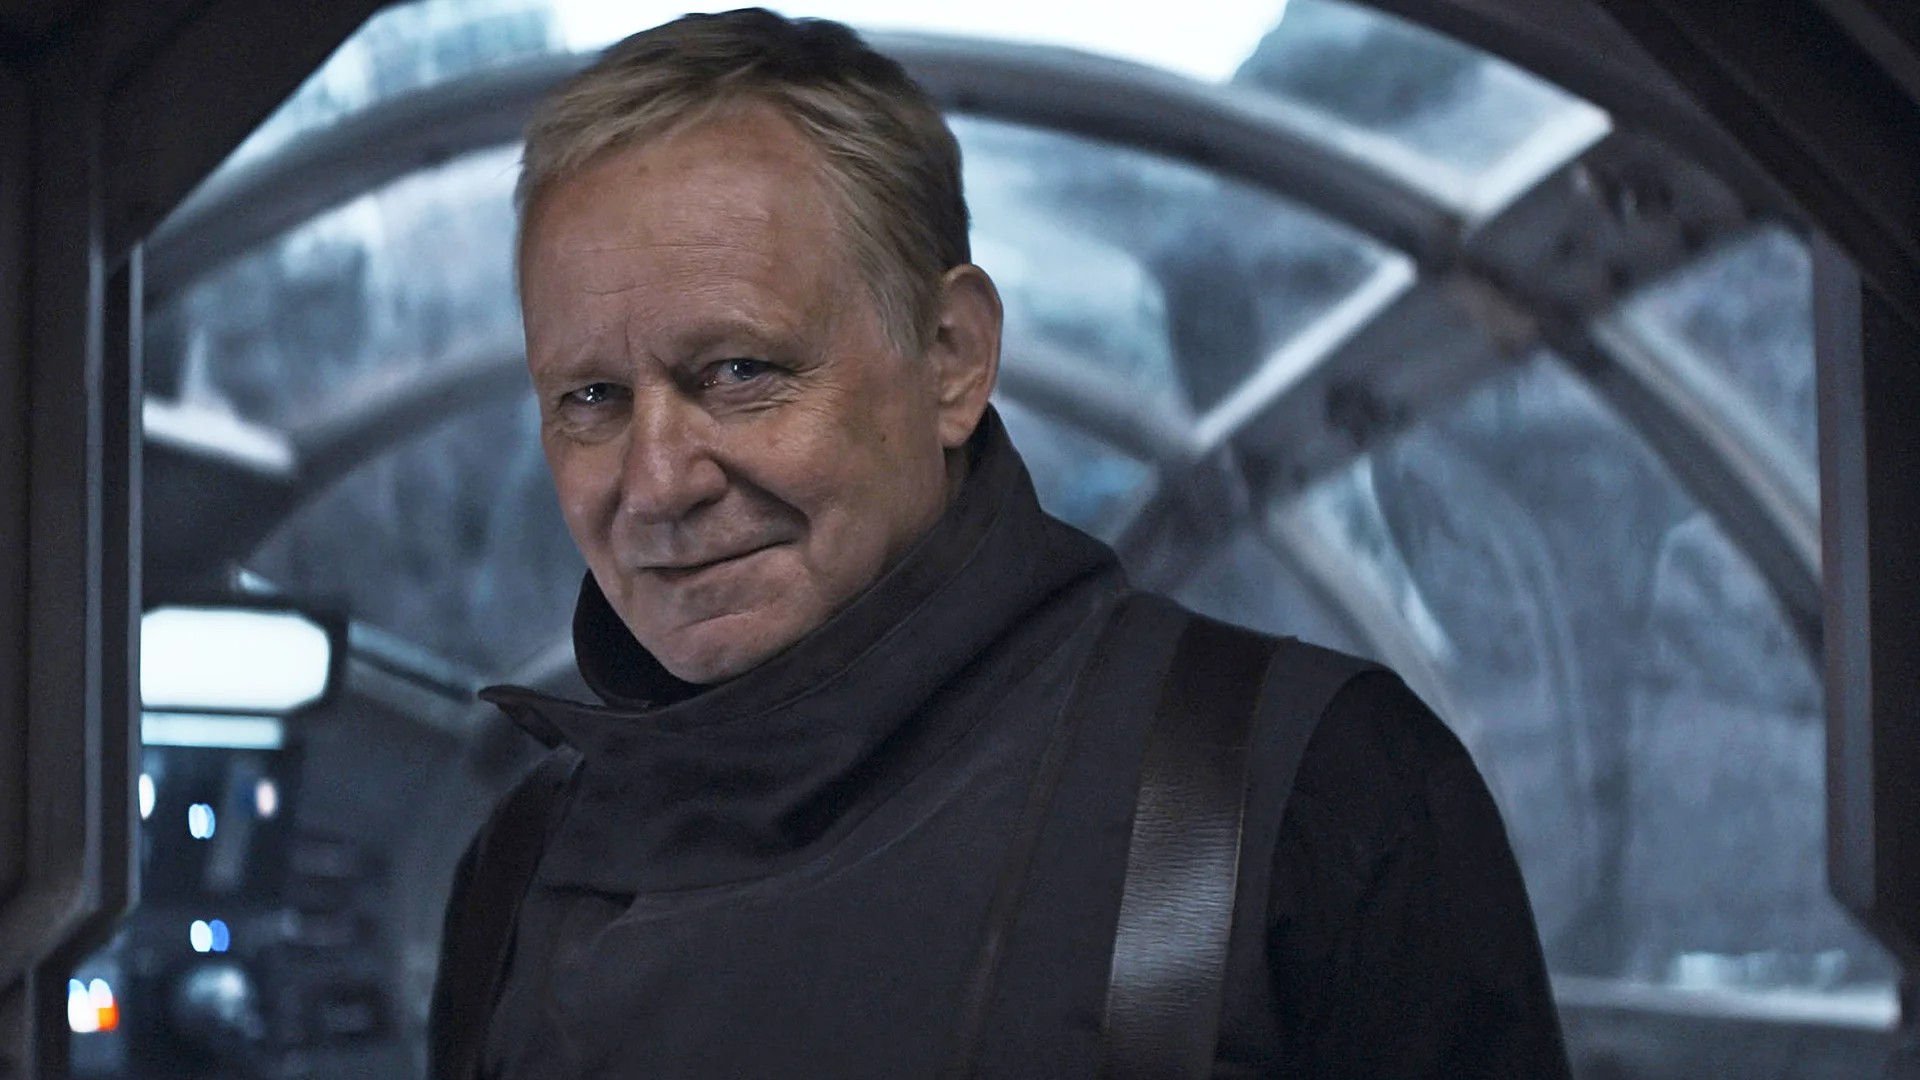 In a recent interview veteran actor Stellan Skarsgard says Andor is Star Wars for grown ups, and teases a release window for Season 2.